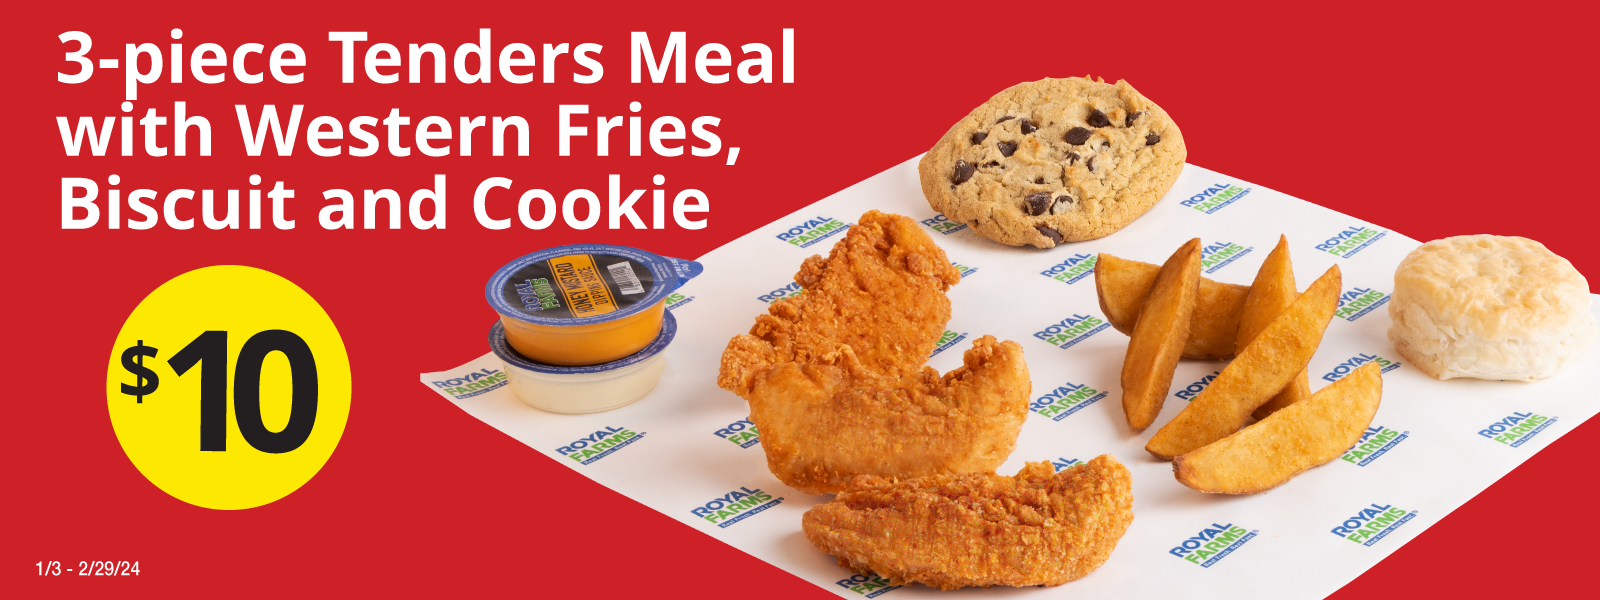 Royal Farms Promo – 3 pc Tenders Meal with Western Fries, Biscuit and Cookie